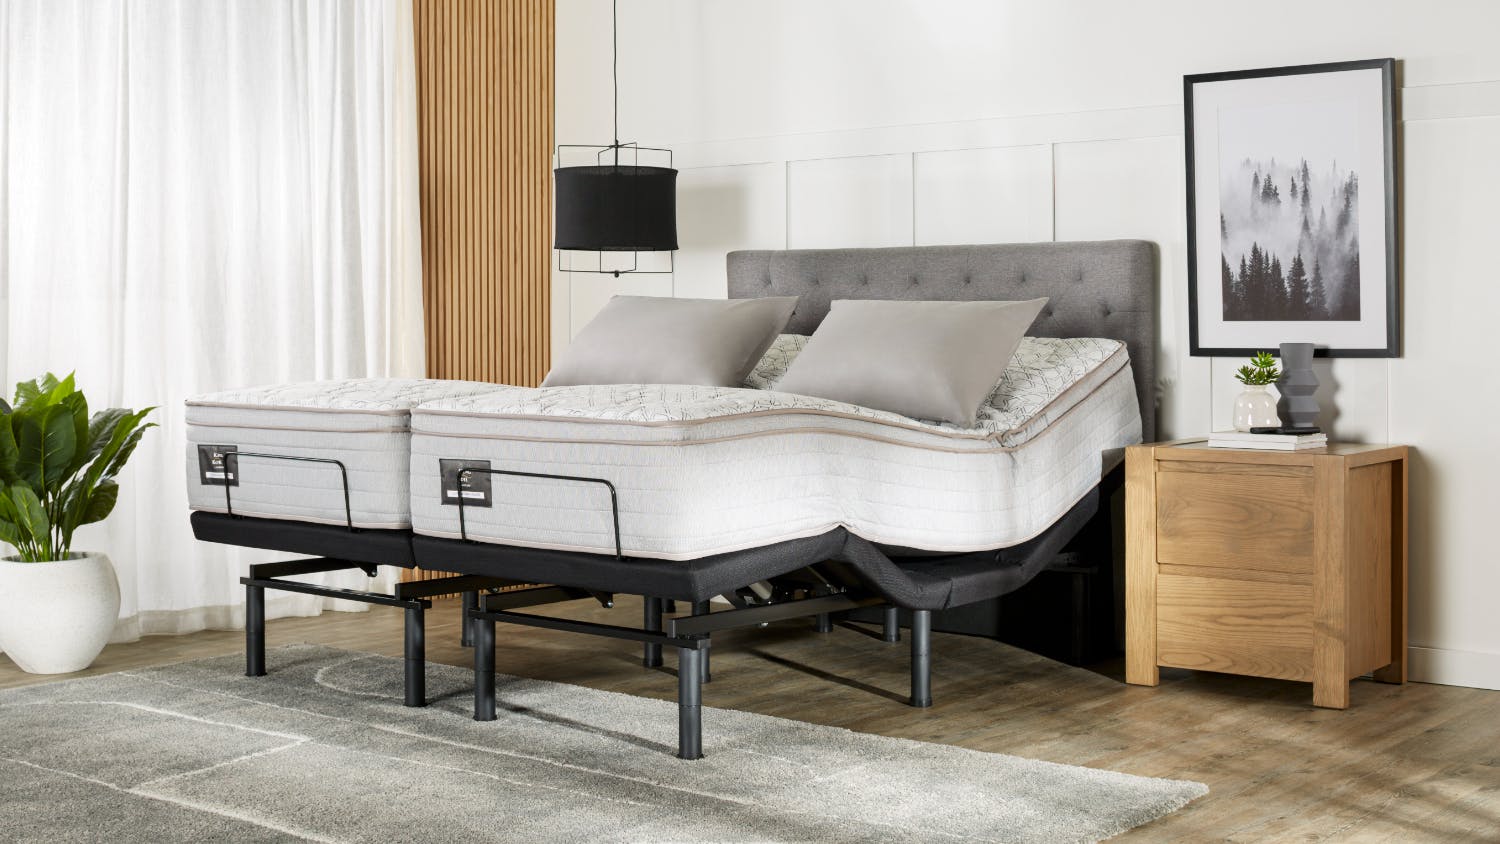 King Koil Conforma Classic II Soft Split Super King Mattress with Virtue Adjustable Base by A.H Beard